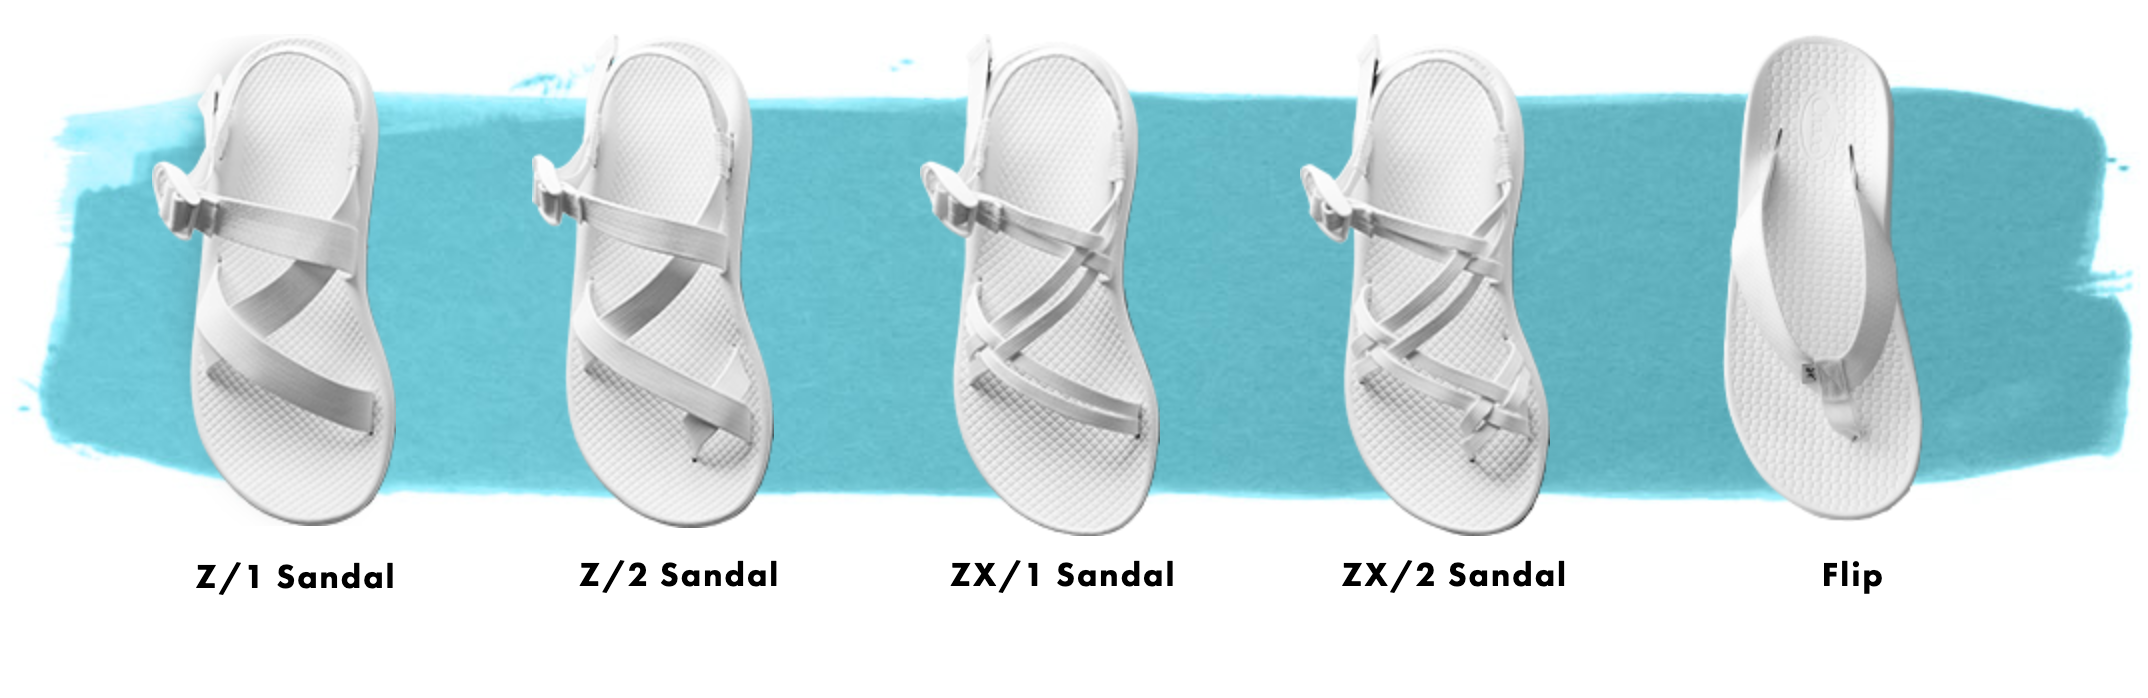 Chaco Personalized Sandals